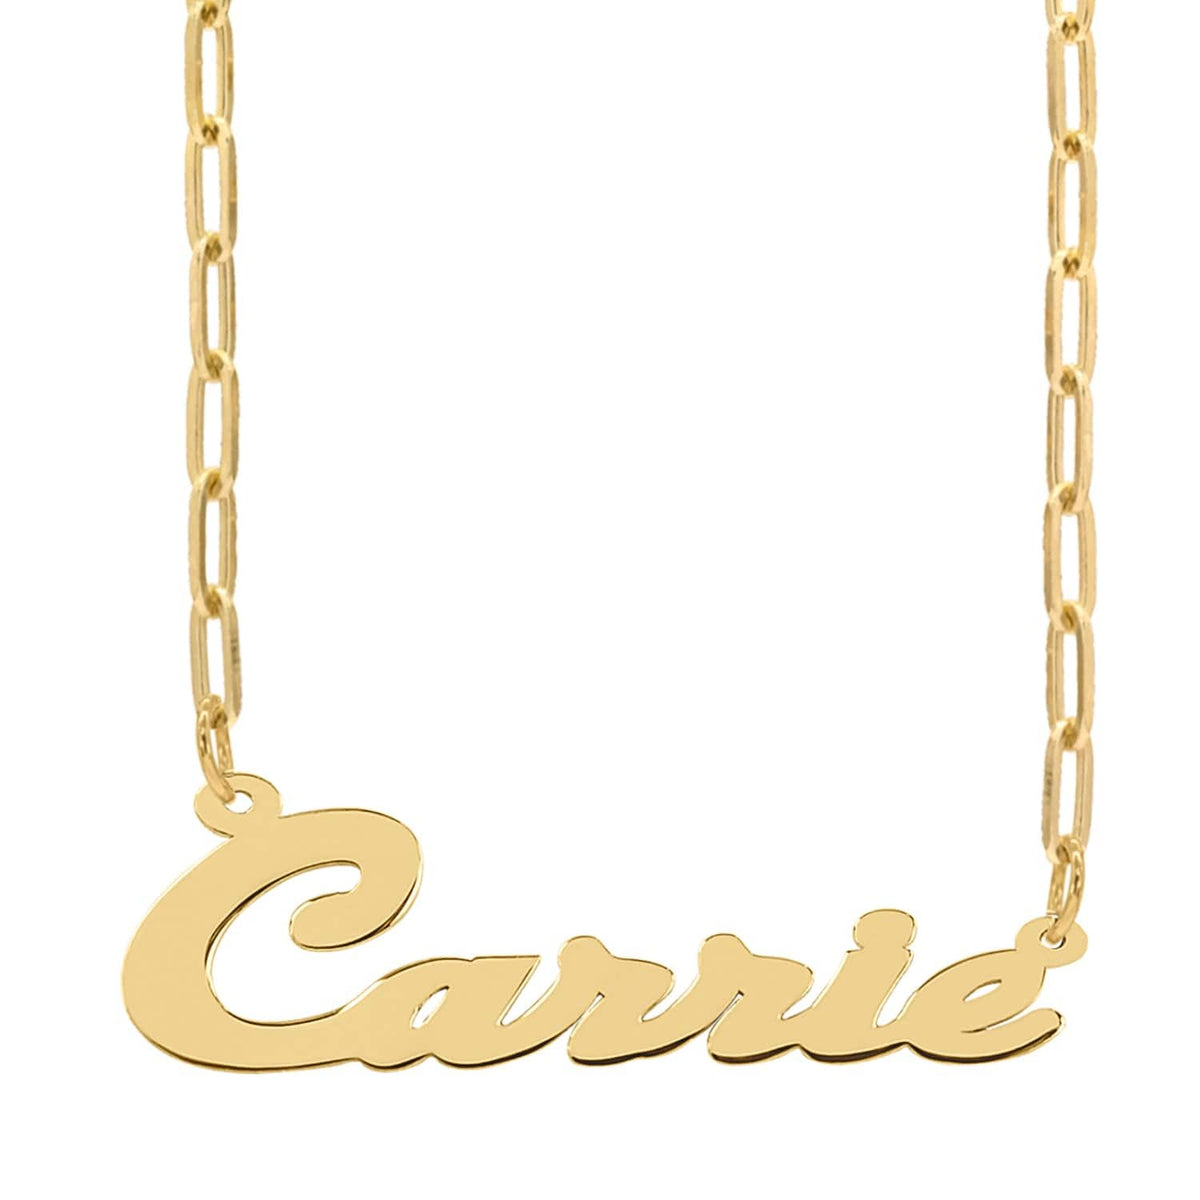 14K Gold over Sterling Silver / Paper Clip Chain Script Name Necklace &quot;Carrie&quot;